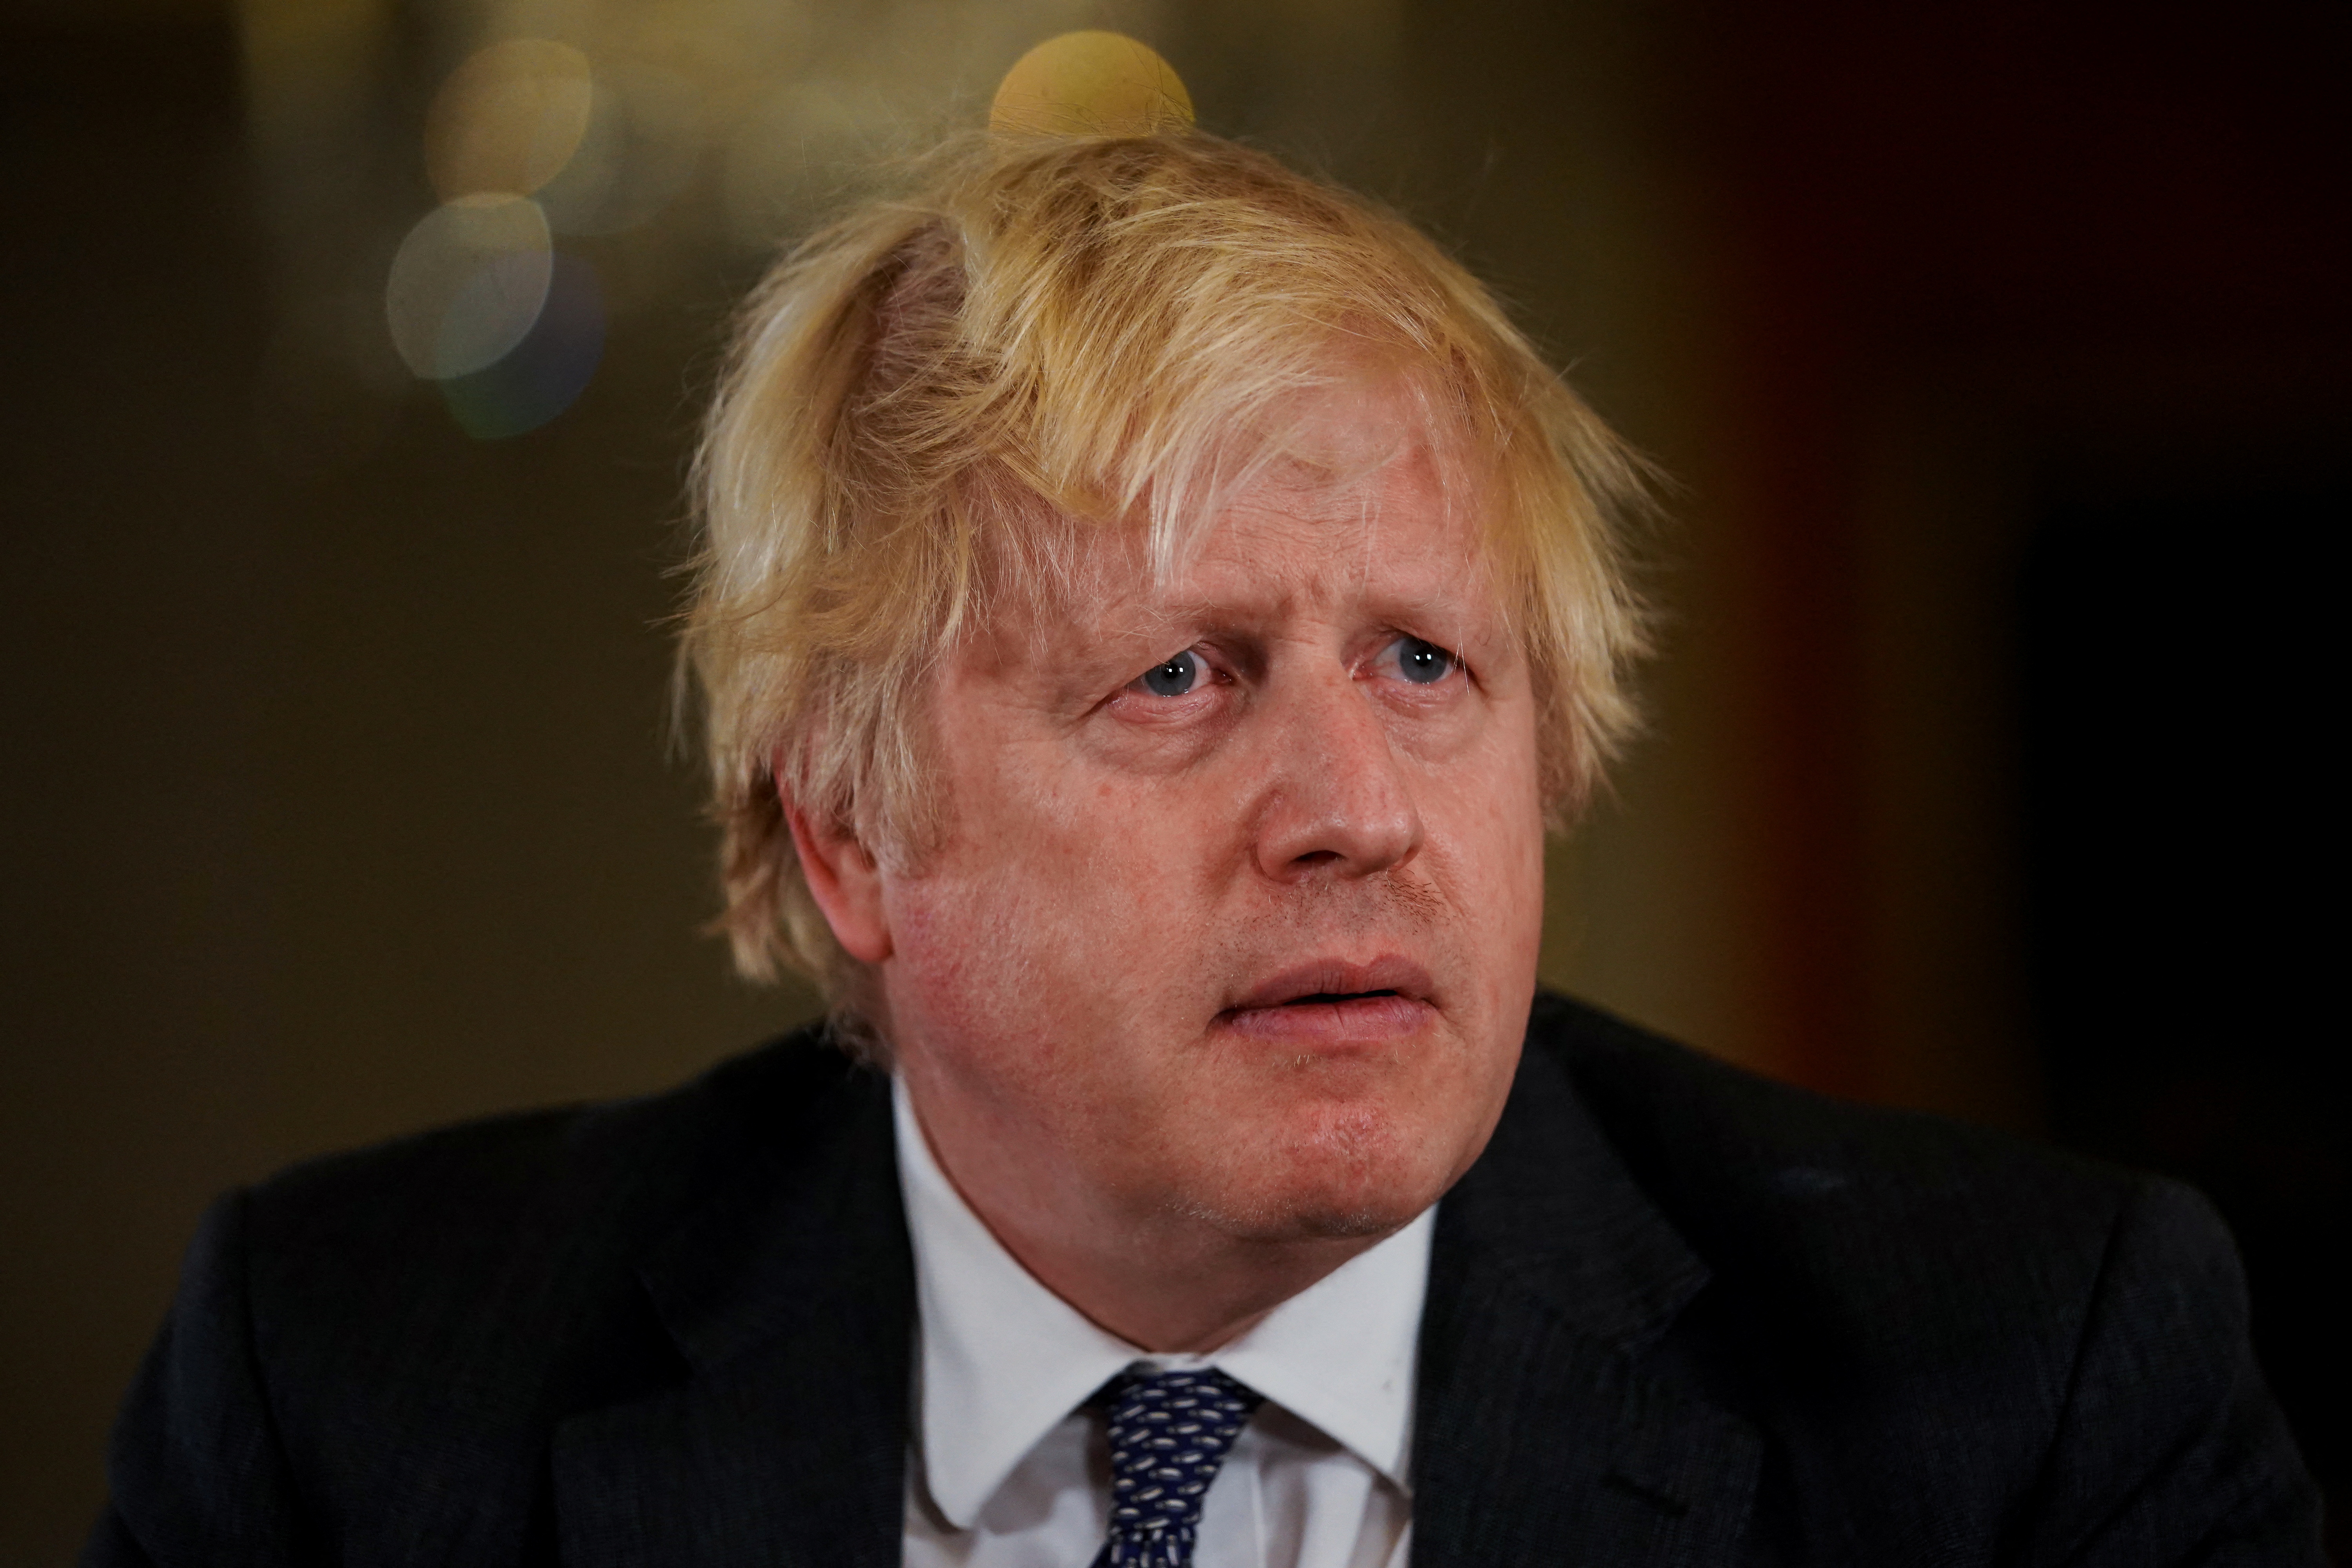 British Prime Minister Boris Johnson records an address to the nation, to provide an update on the booster vaccine COVID-19 programme